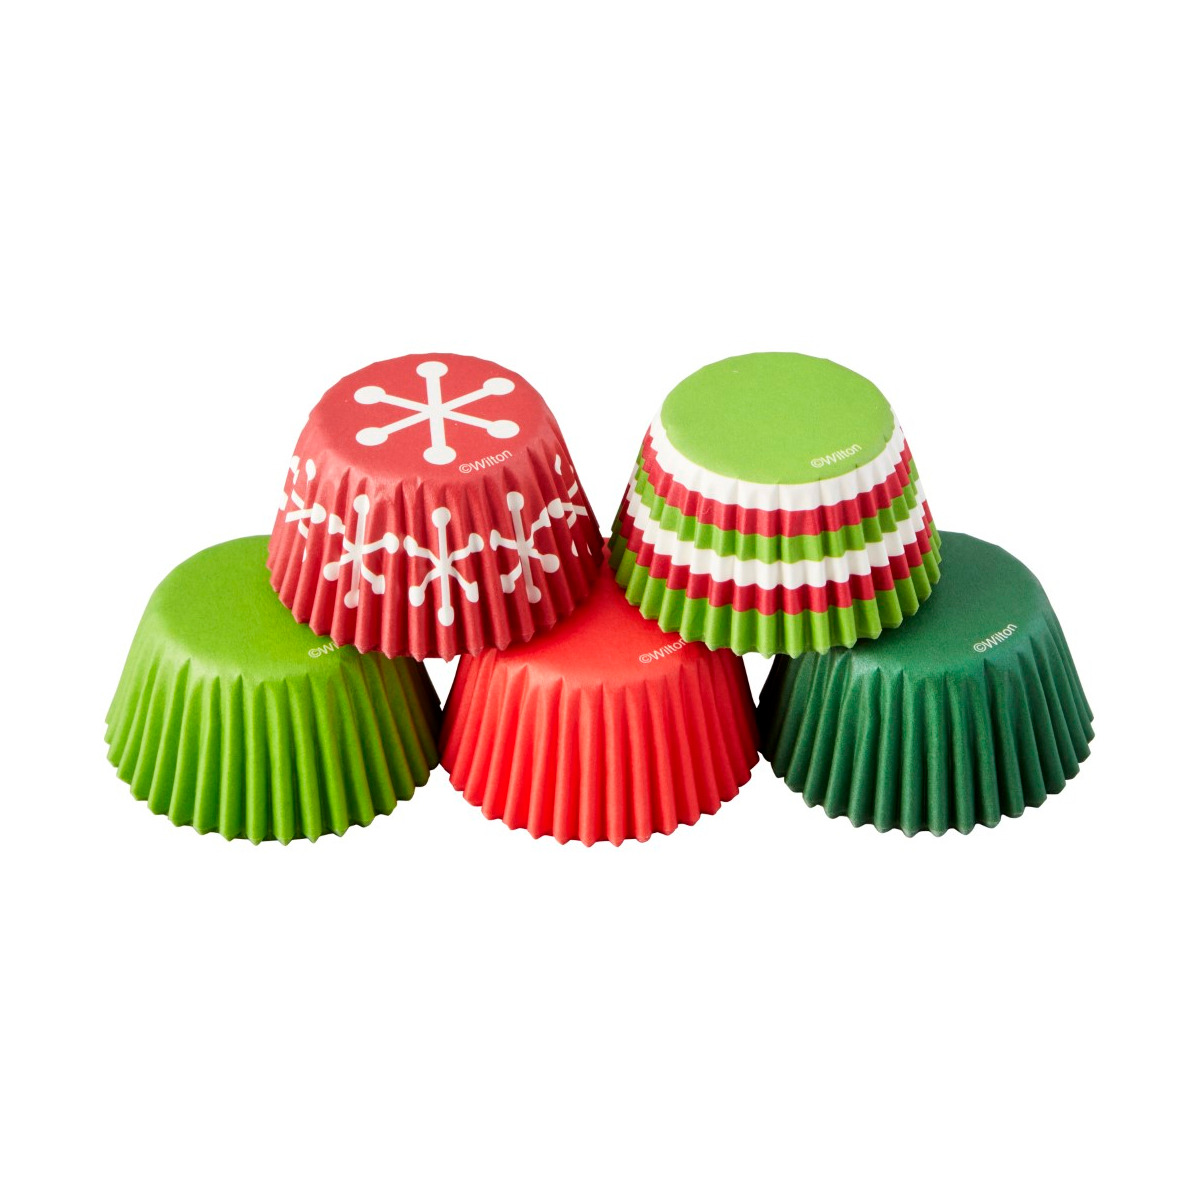 Wilton X'mas Holiday Mini Baking Cups Tube (Pack of 150)